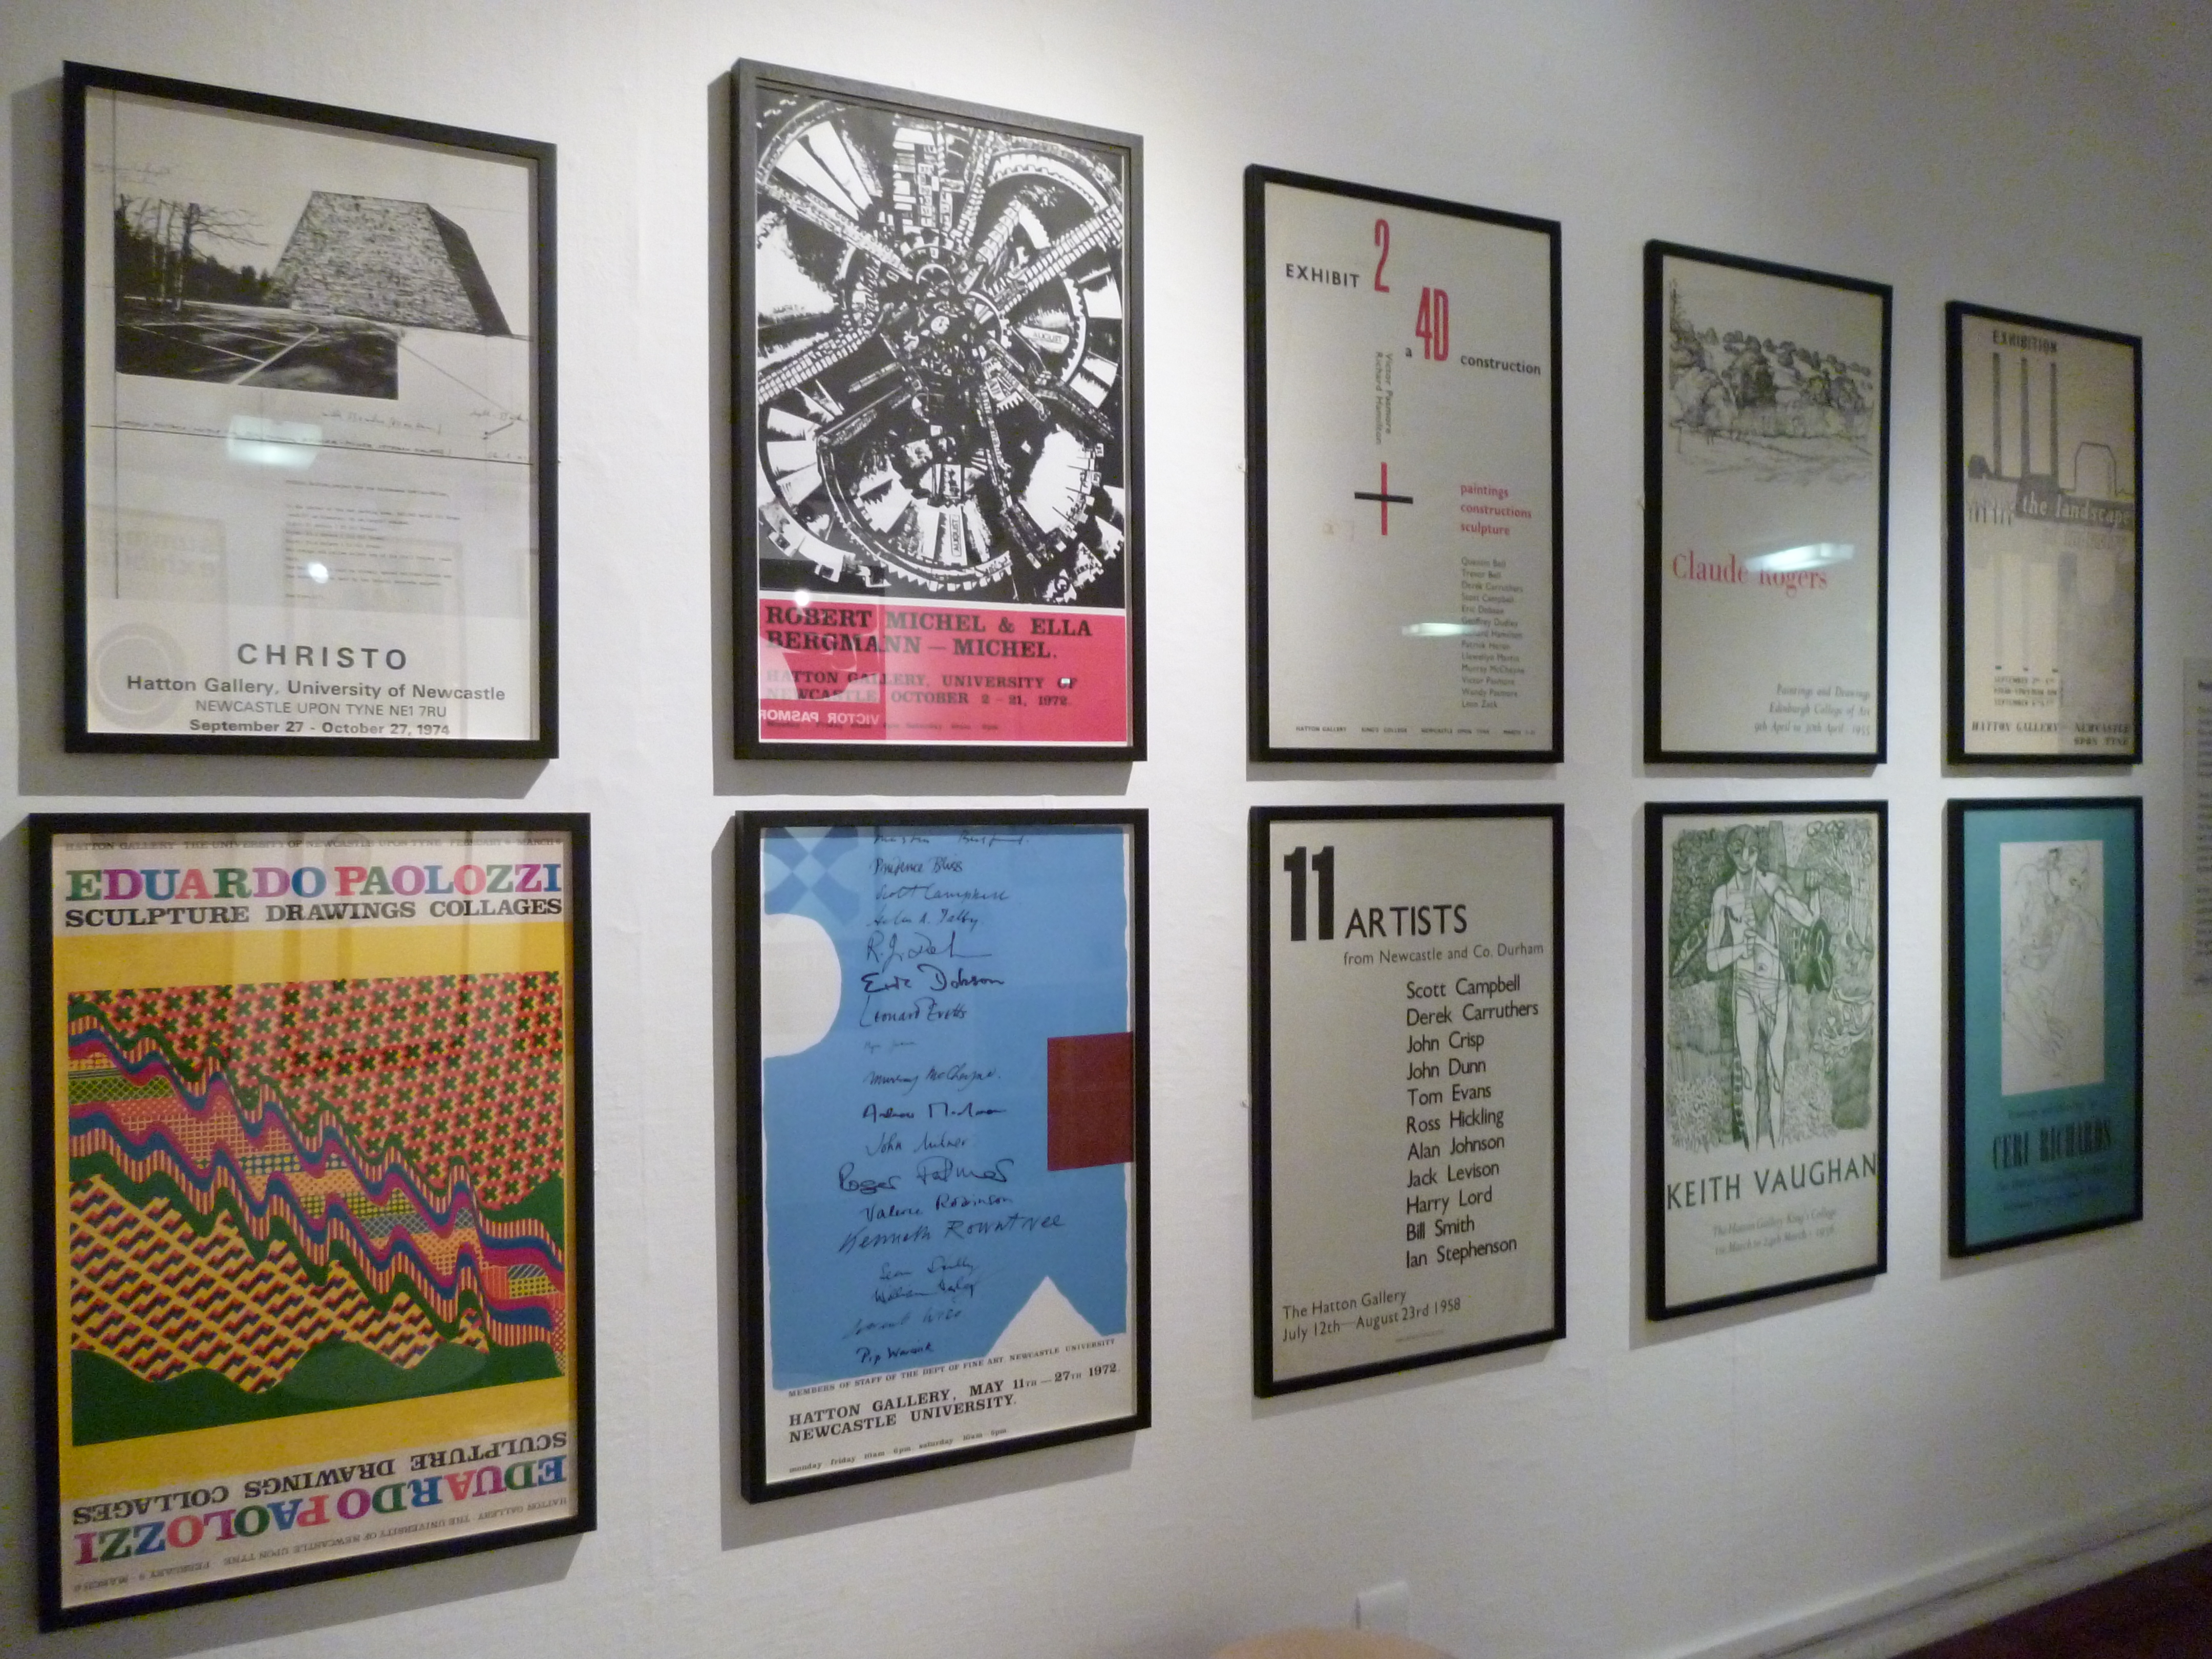 Exhibition view showing posters printed by Kip Gresham in the early 70s